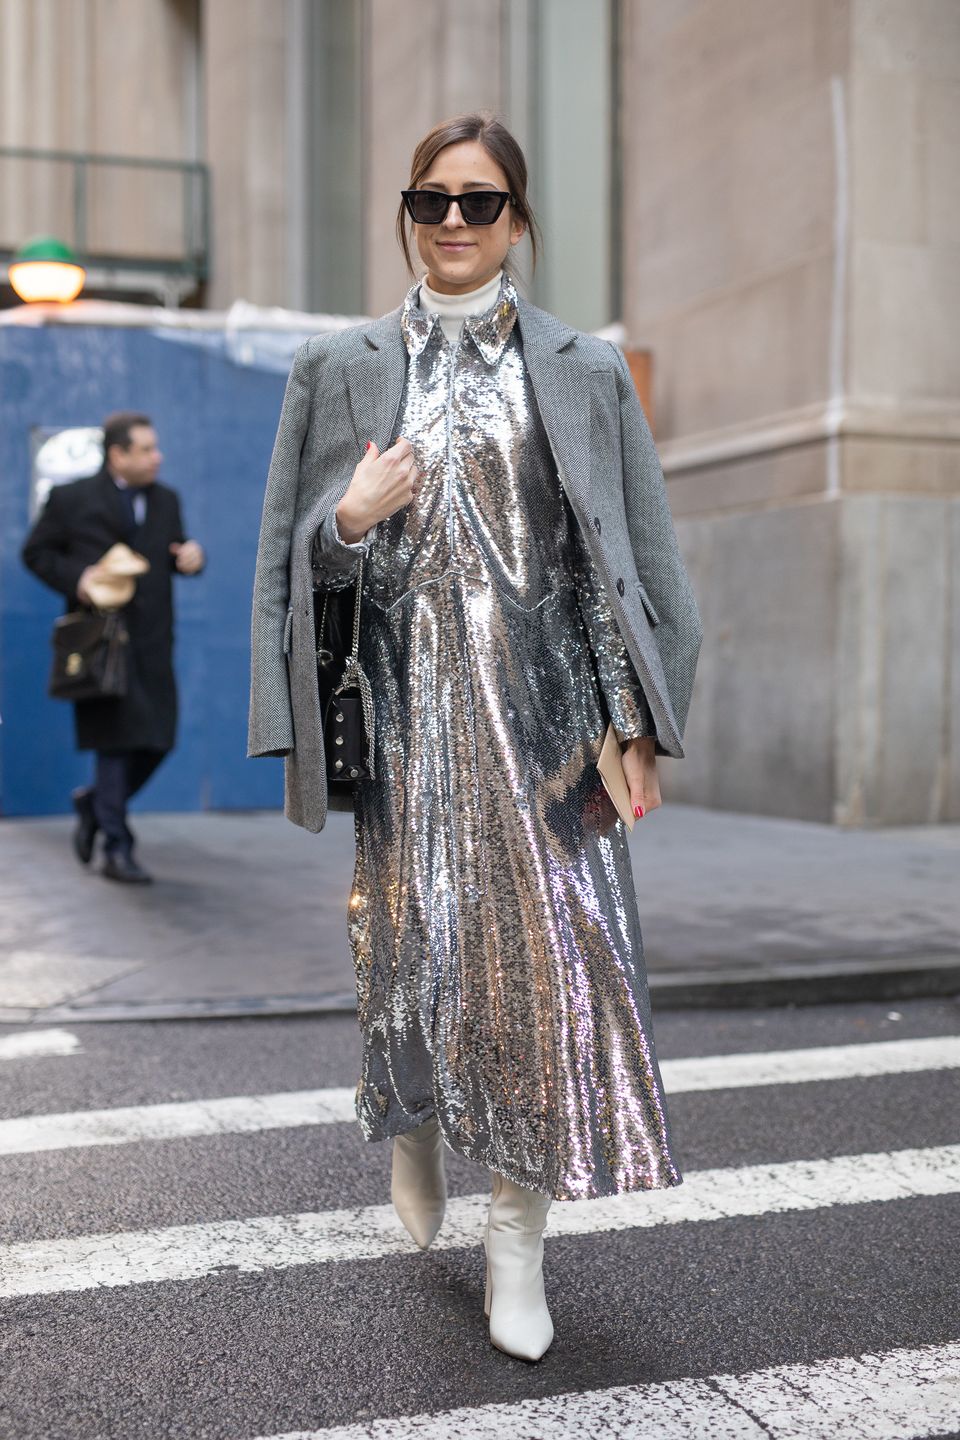 The Best Street Style Moments From Fashion Month | HuffPost Life